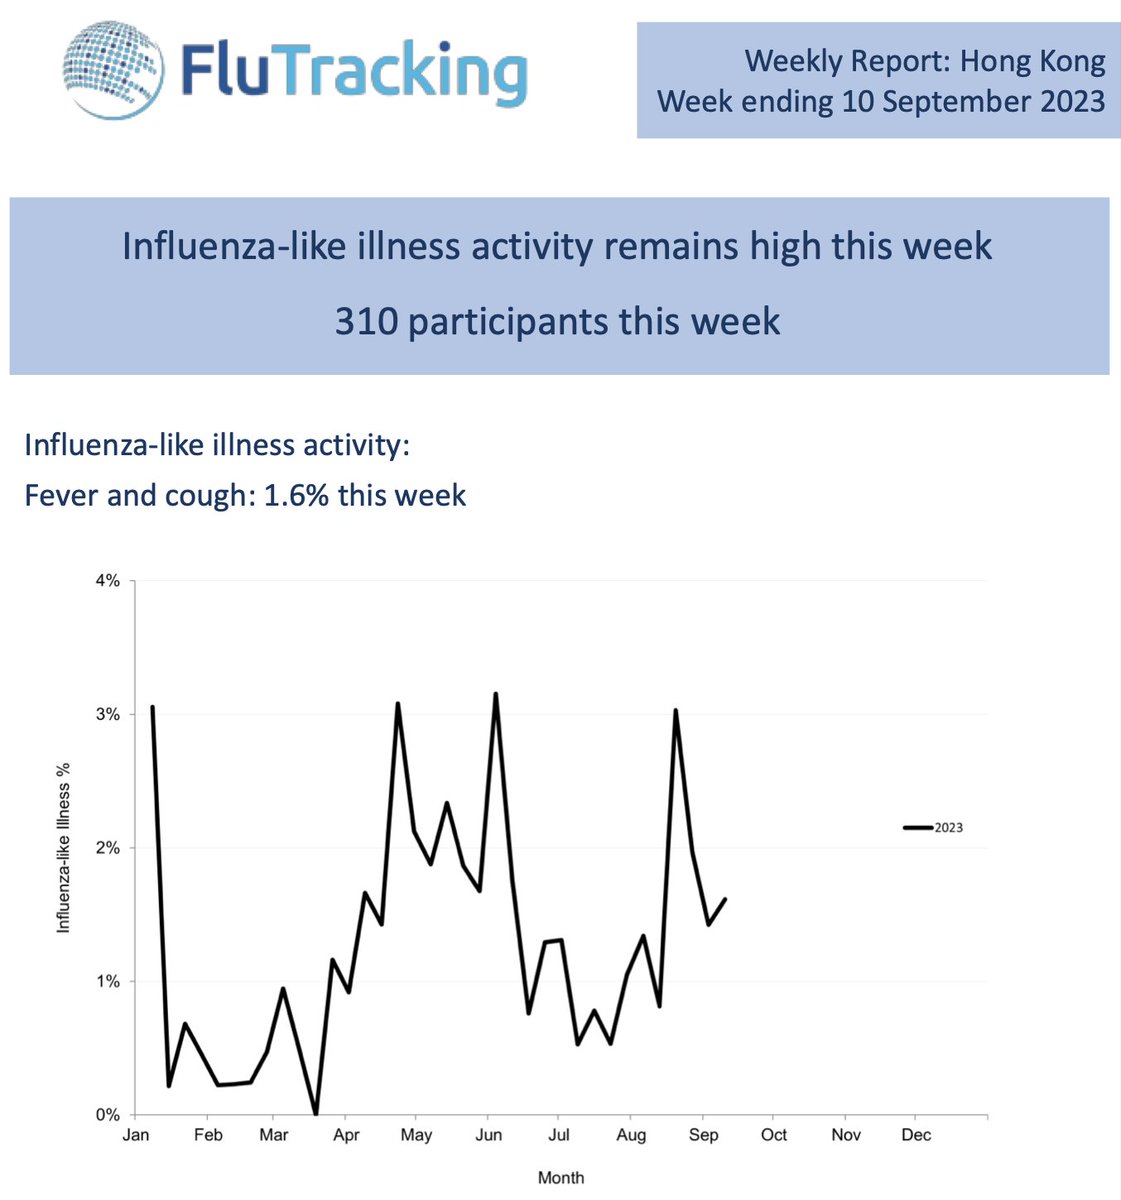 A quick plug for the FluTracking survey run by @HKU_SPH: a 10-second survey every Monday to gauge prevalence of flu-like illness. A very helpful data point—and the more participants, the better. Sign up link: flutracking.net/Join/HE